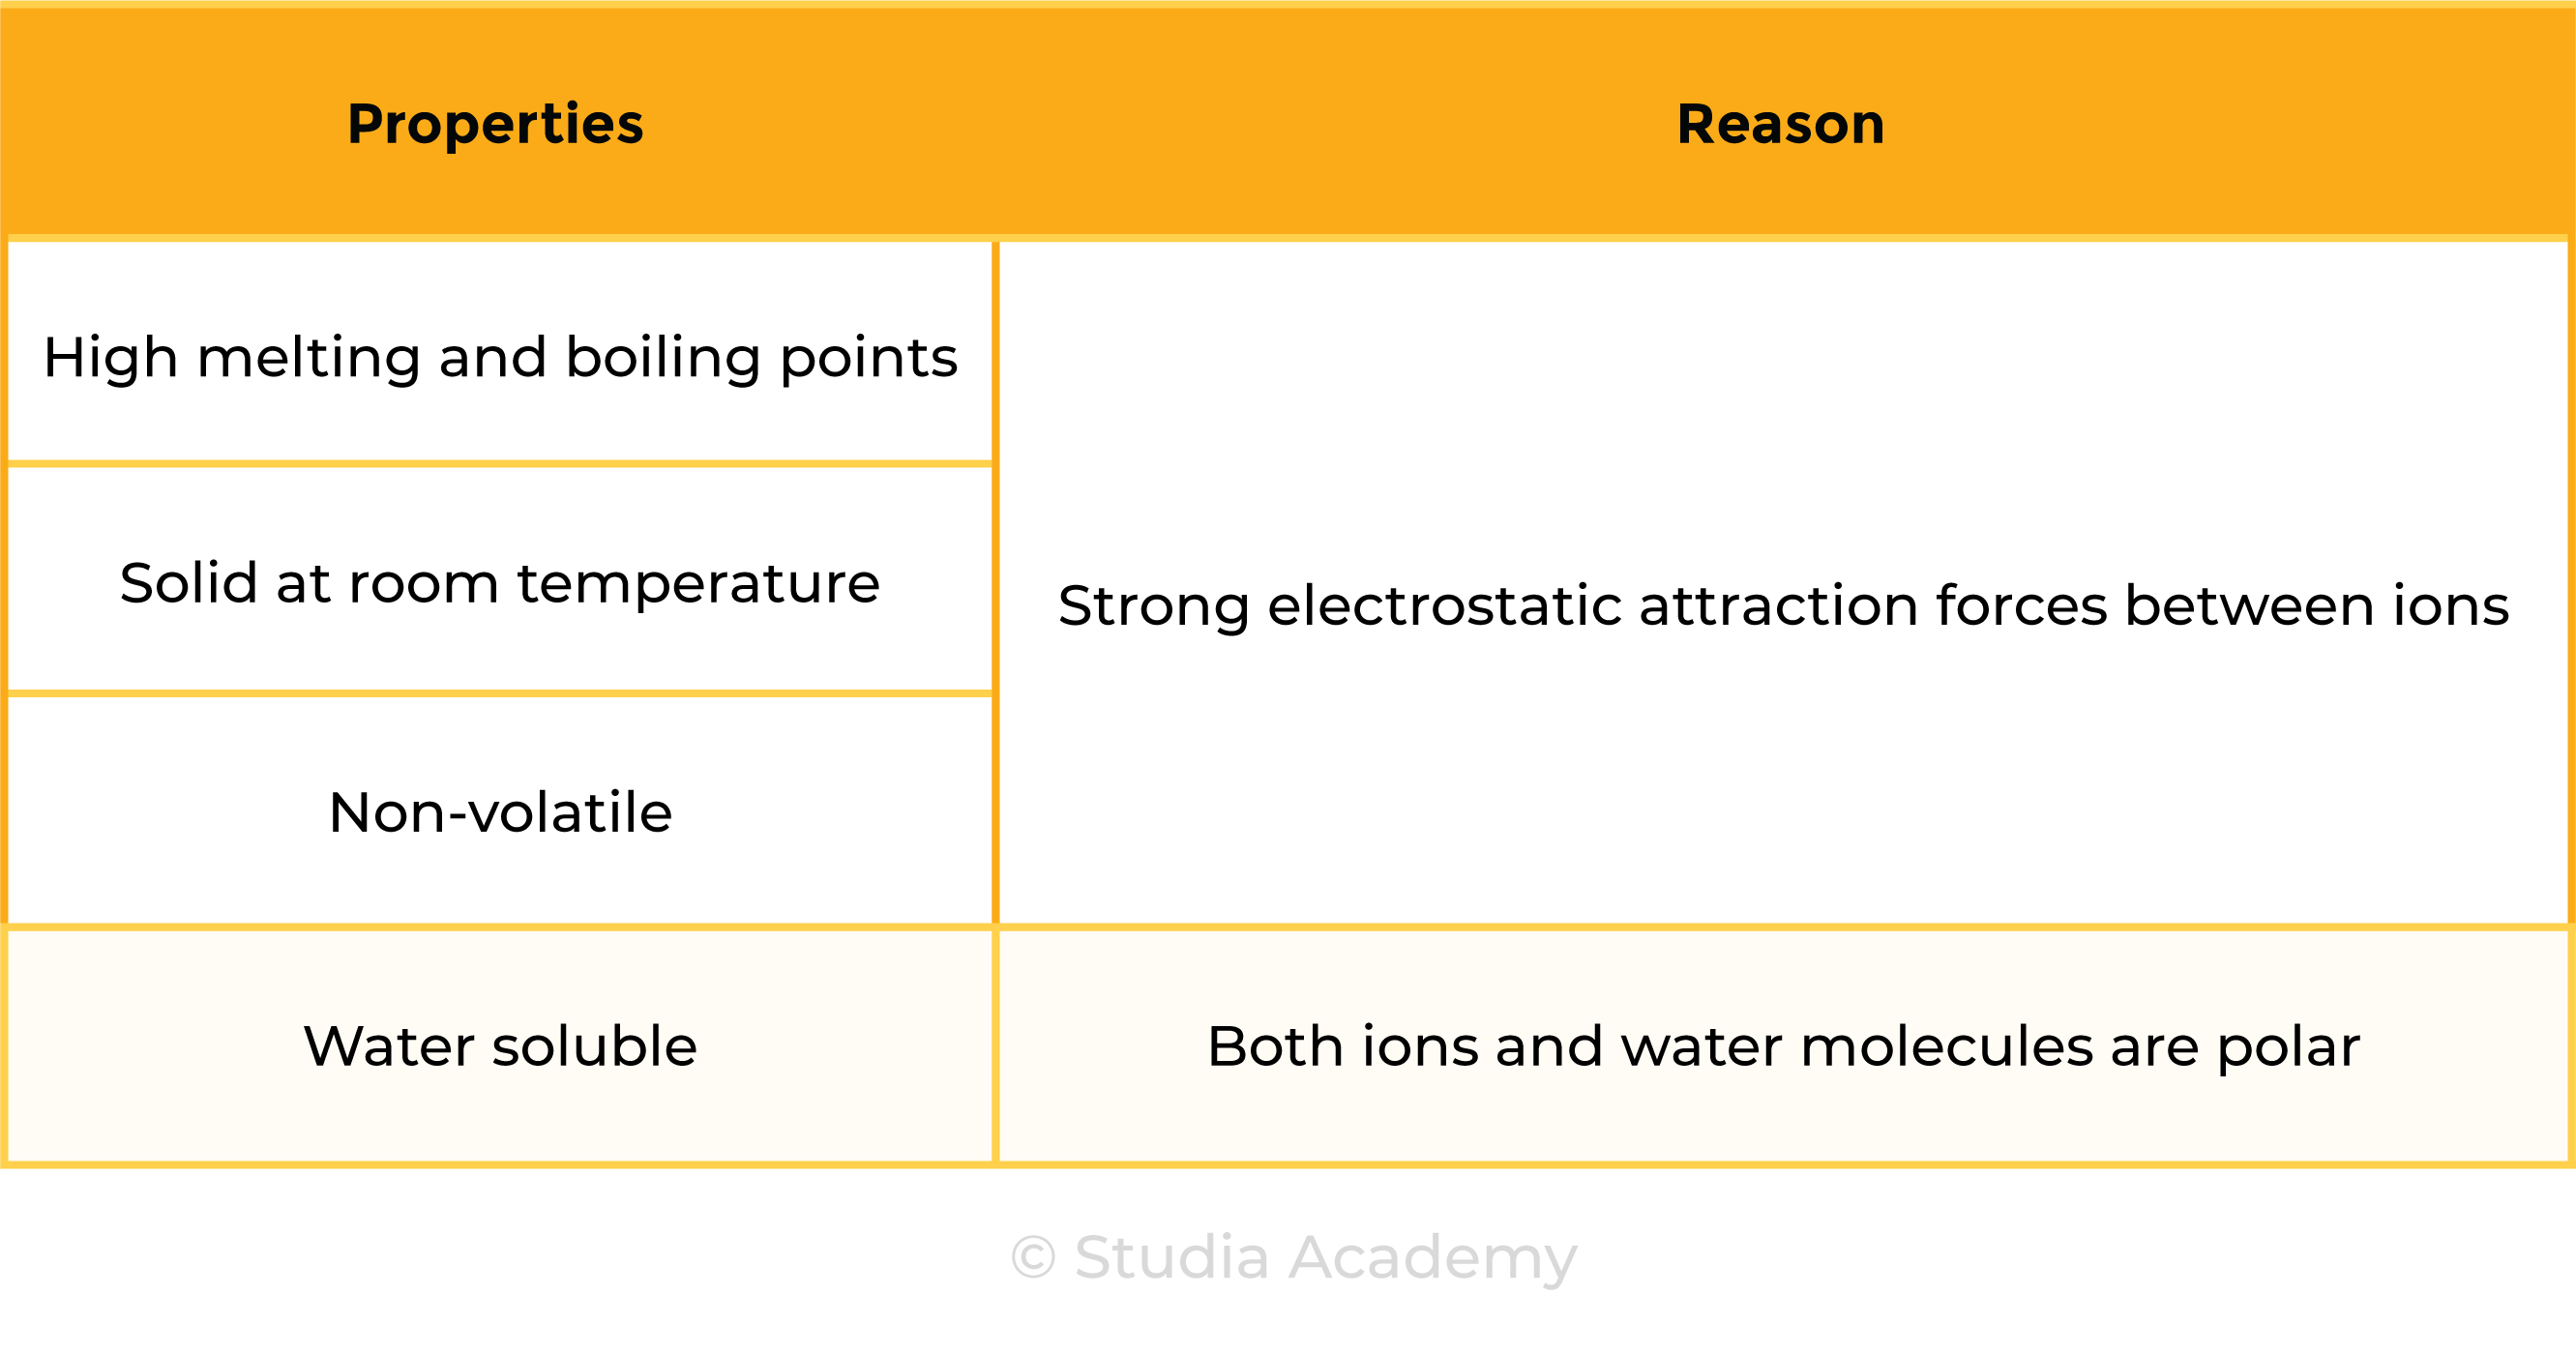 edexcel_igcse_chemistry_topic 06 tables_ionic bonding_003_giant ionic lattice compounds physical properties